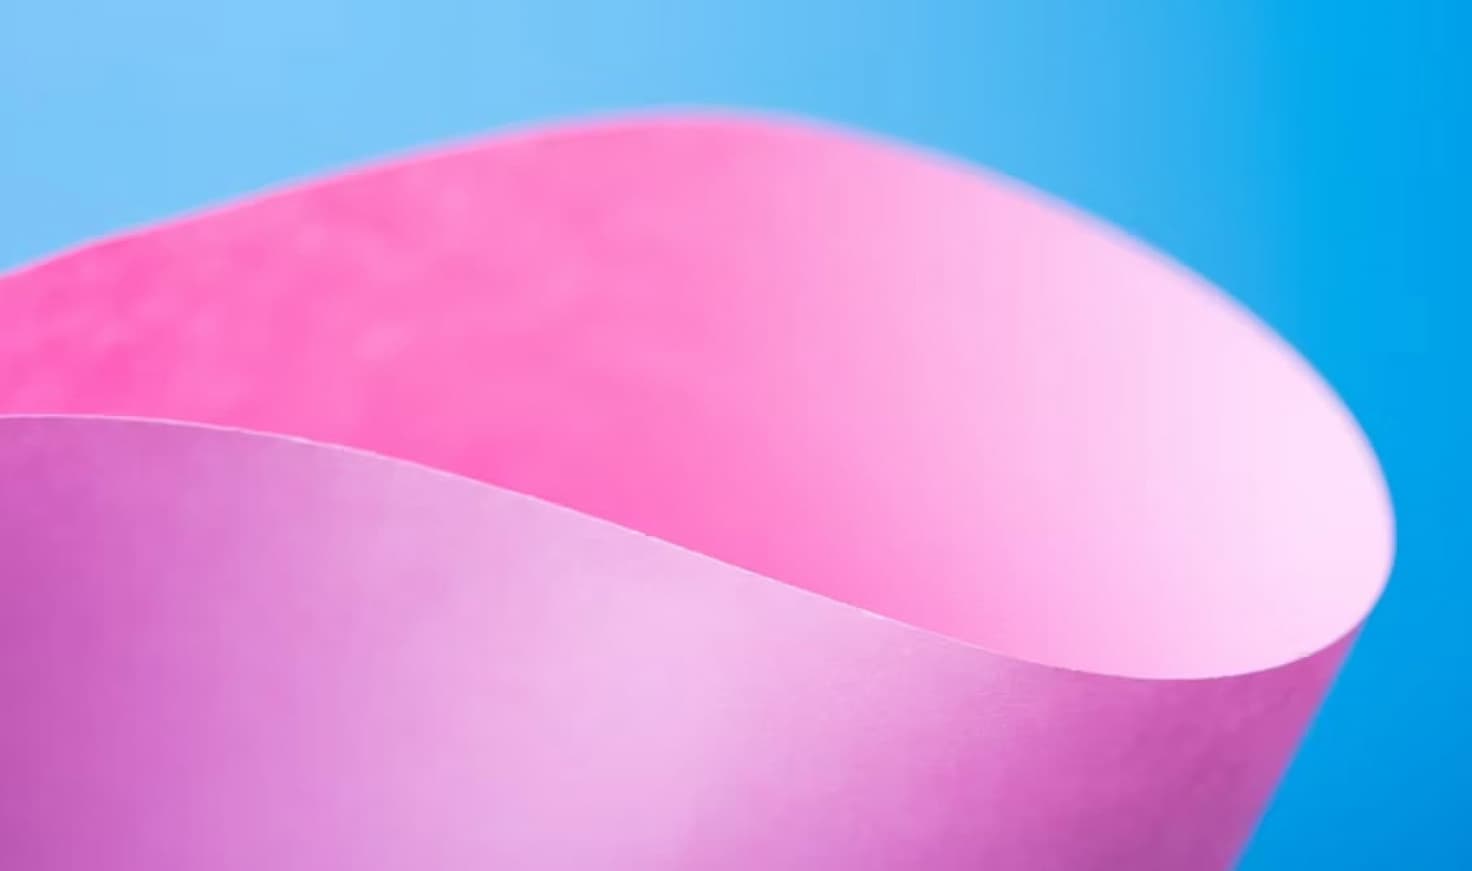 A bright pink sheet of paper used to wrap flowers curves in front of rich blue background